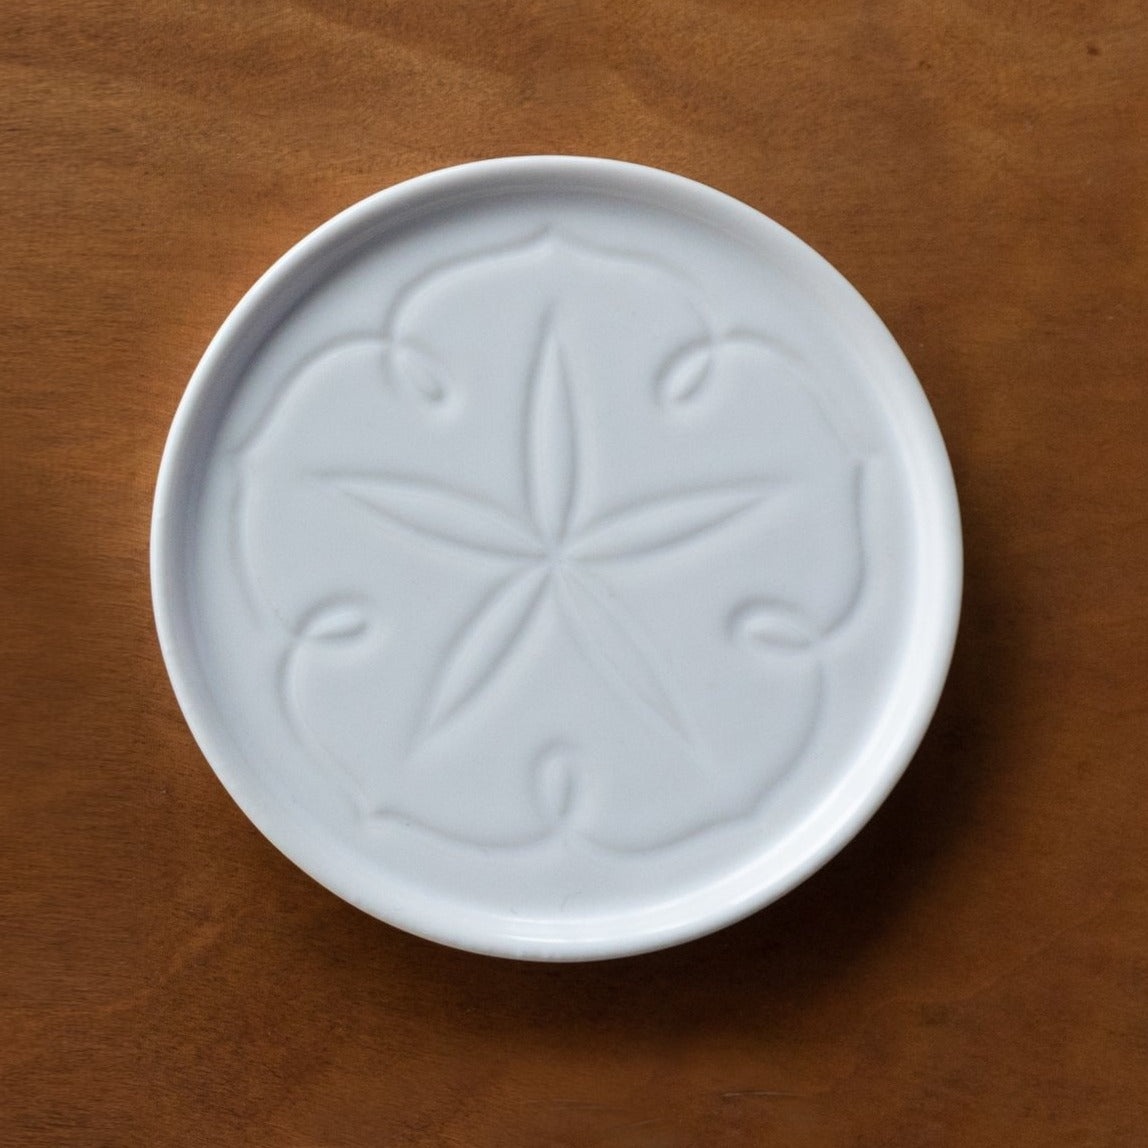 Carved Porcelain Coasters - White